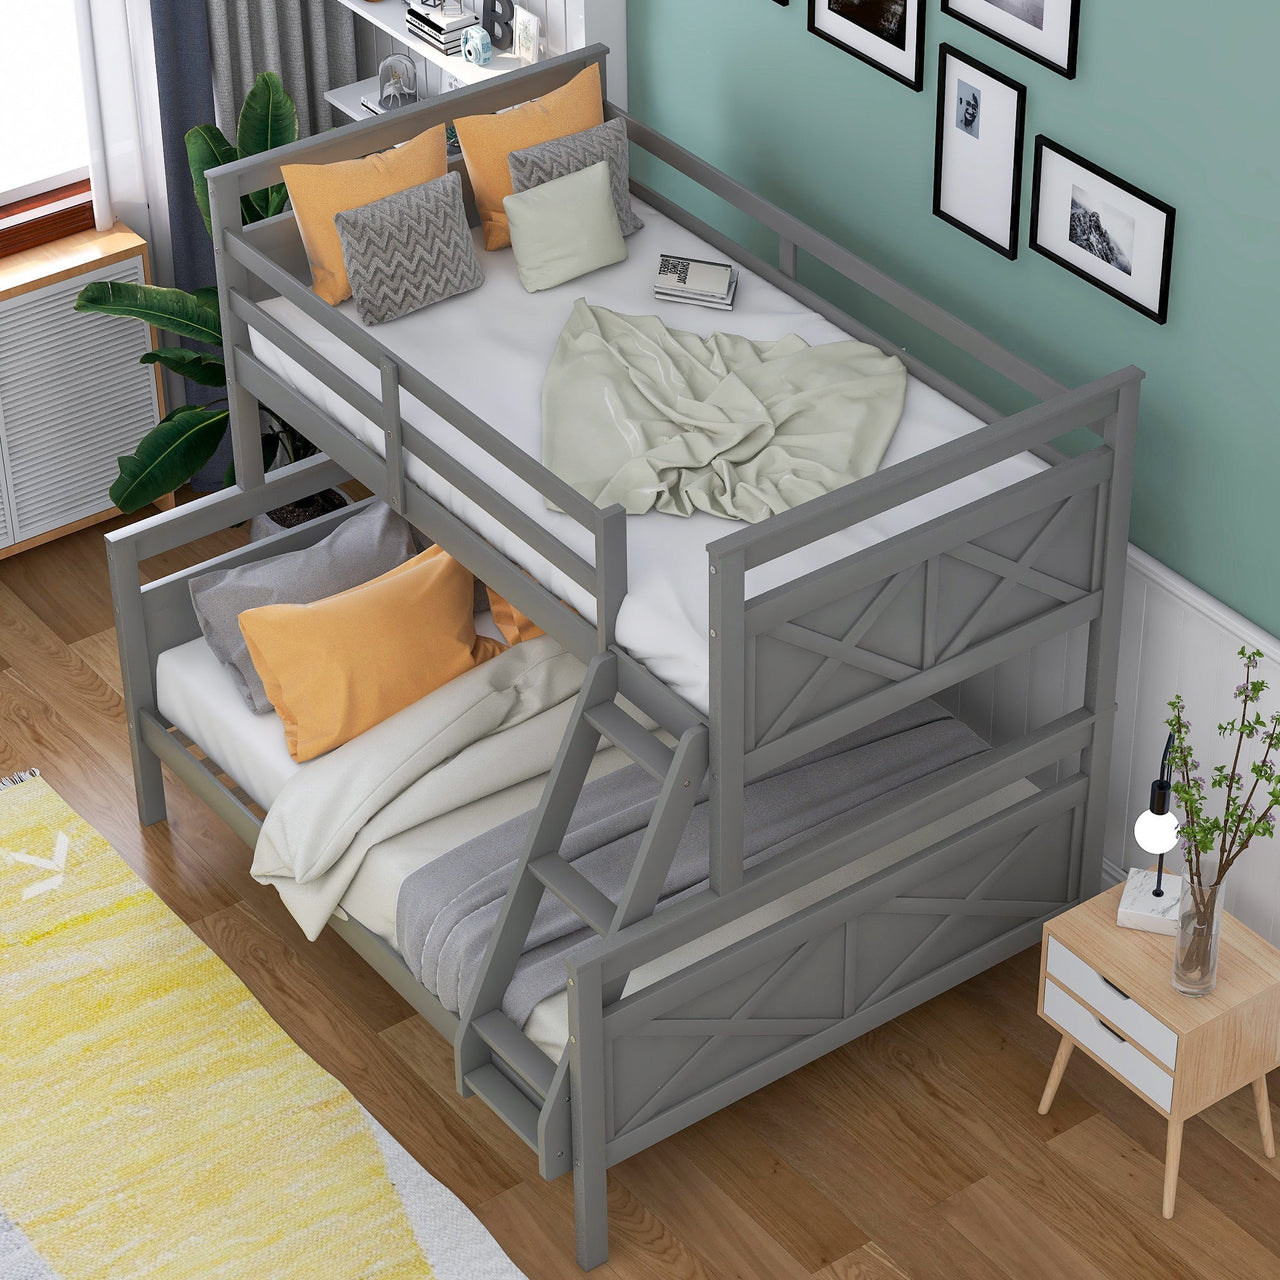 Twin Full Over Queen Bunk Bed with Ladder and Guardrail - Casatrail.com